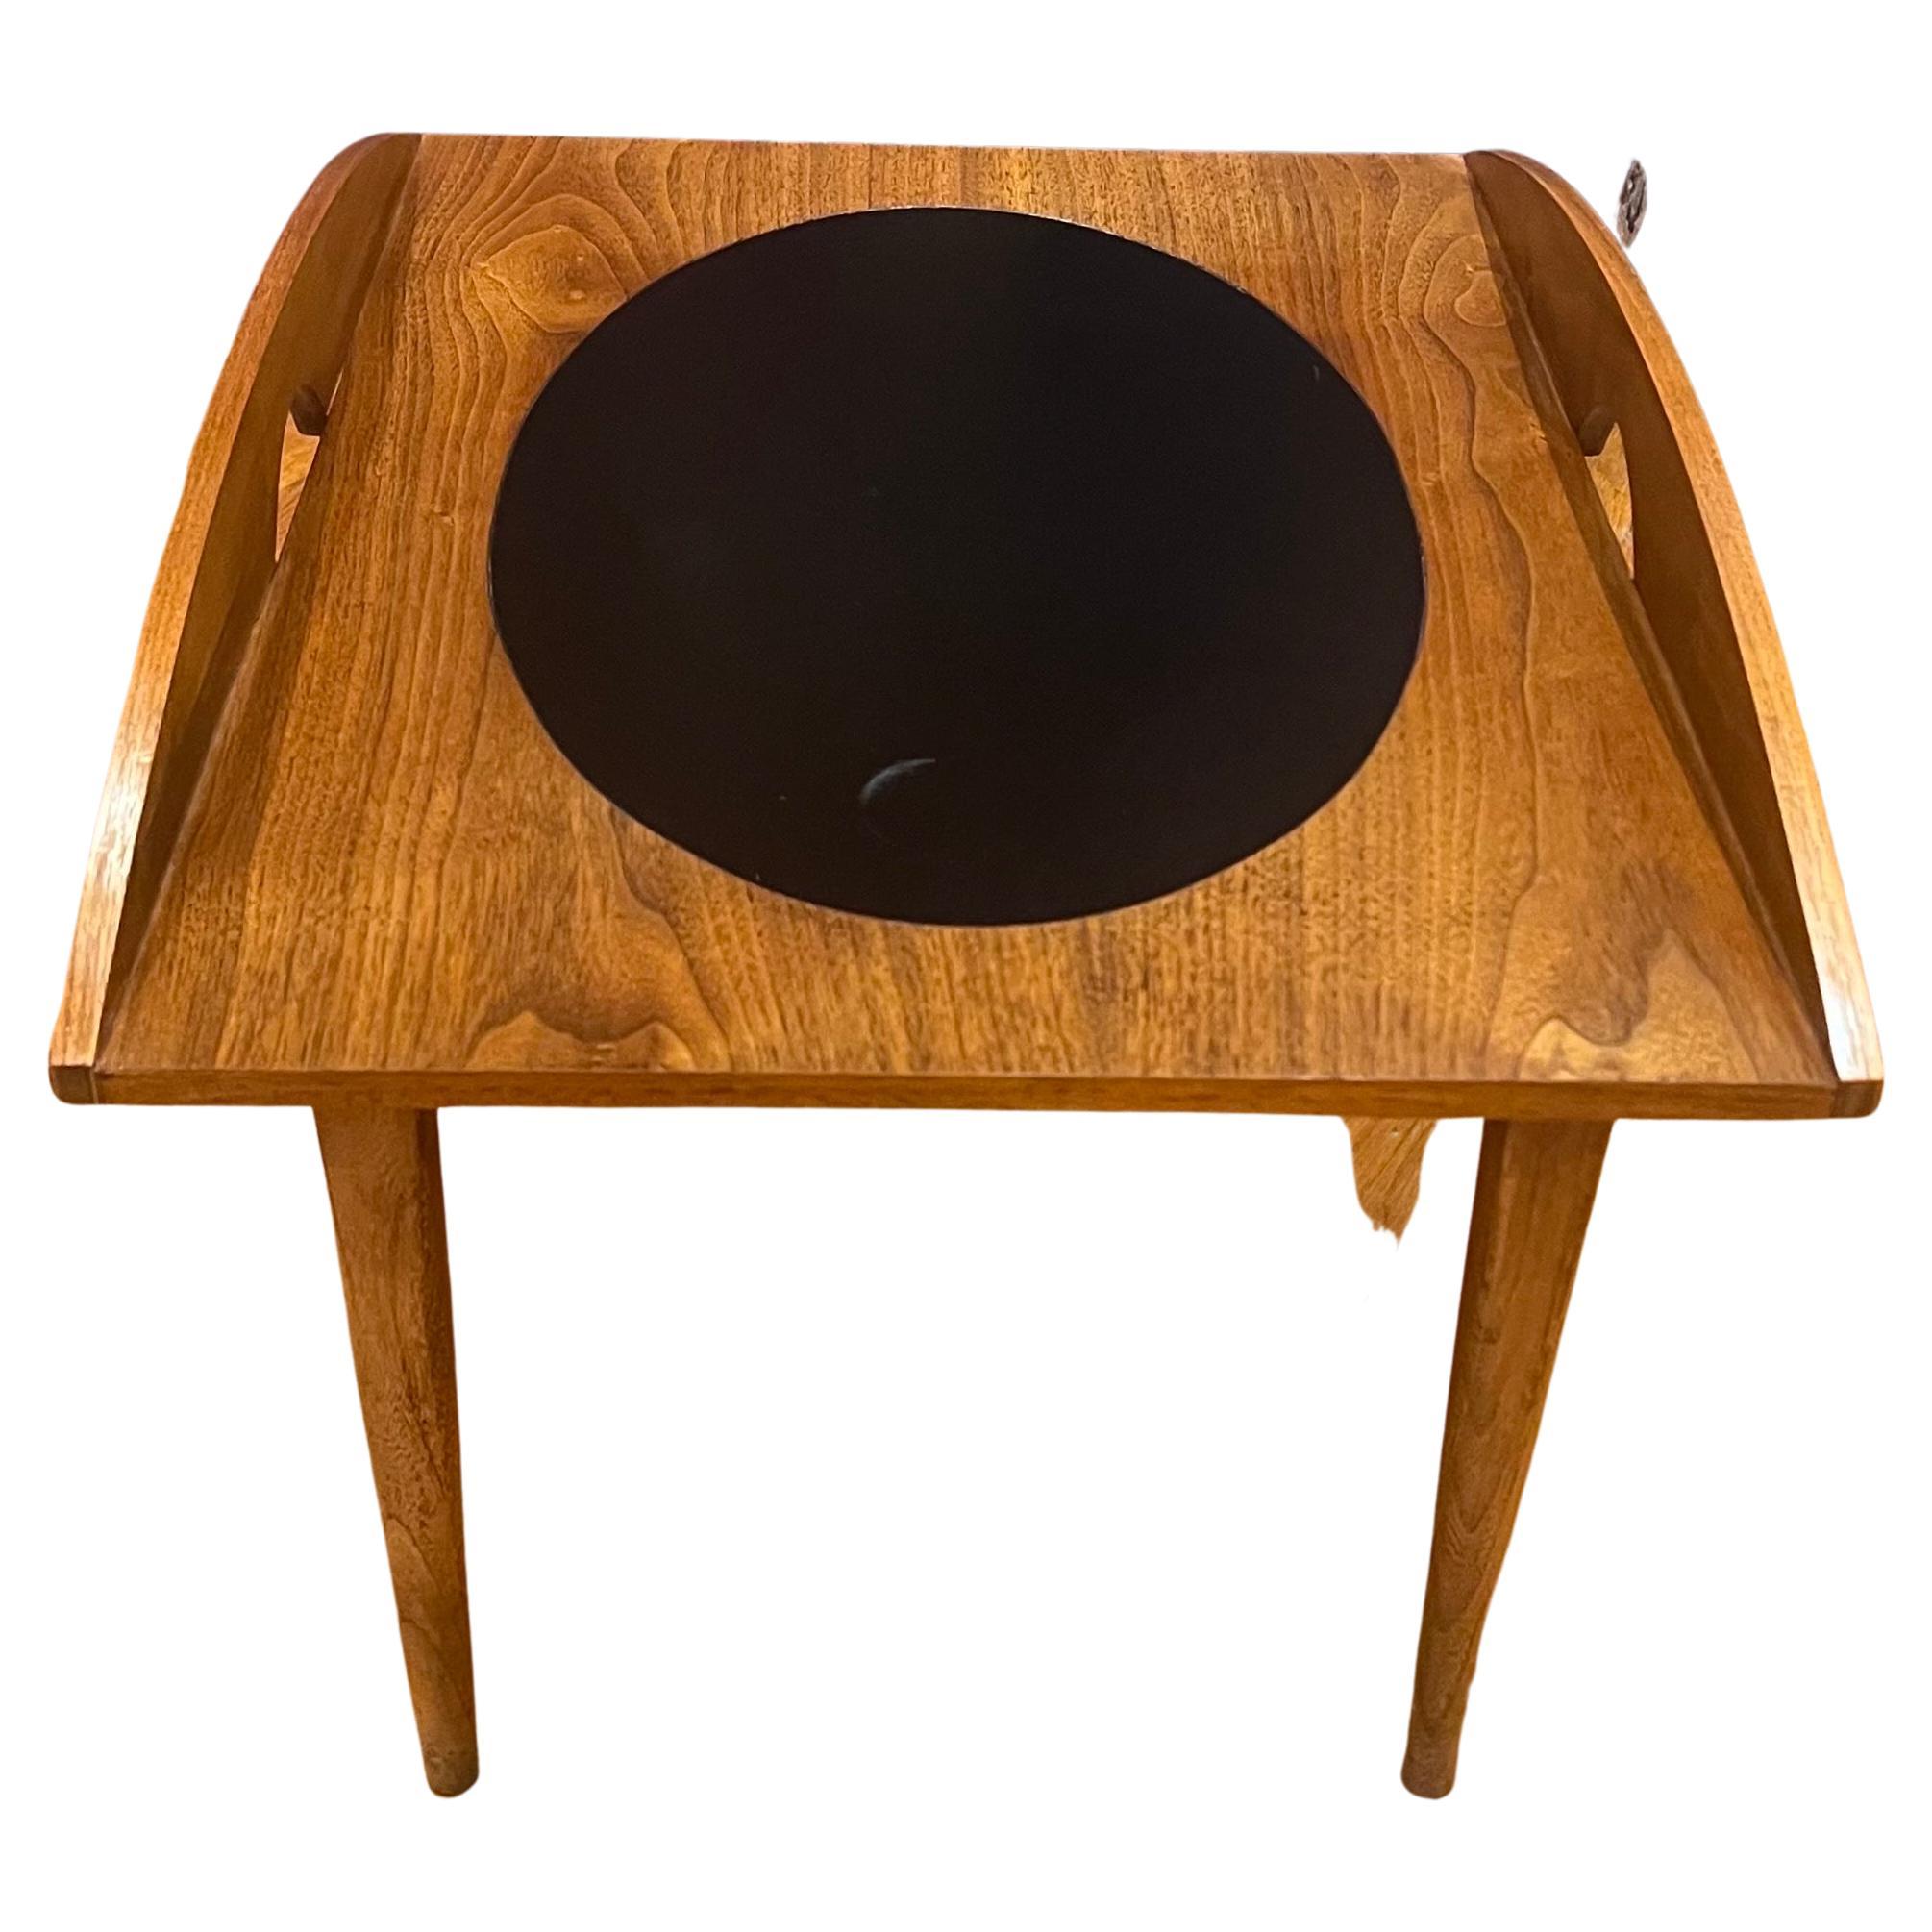 Very rare small butler table was designed by Paul McCobb for Lane, circa the 1960's versatile and elegant with a leather oval top walnut top, and elm wood base.